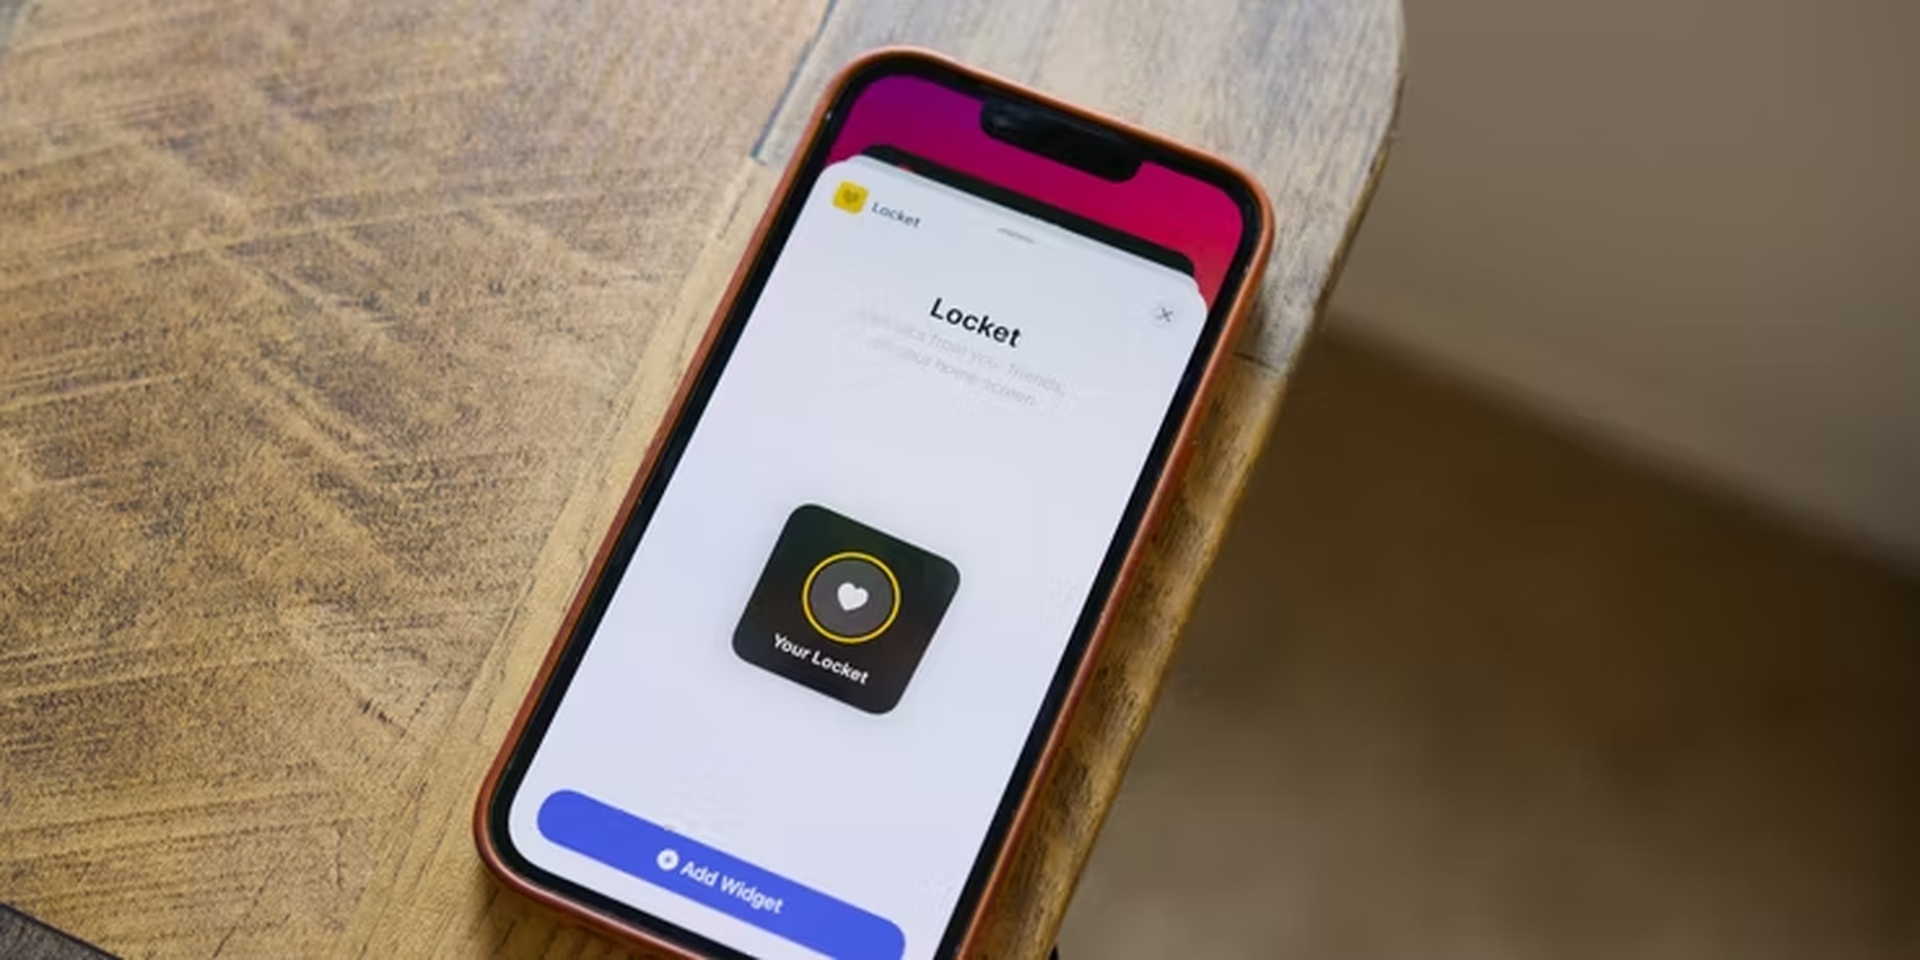 It isn't every day that a new social media app pops up and creates a buzz, but Locket widget app did just that, and it is still gaining more traction.